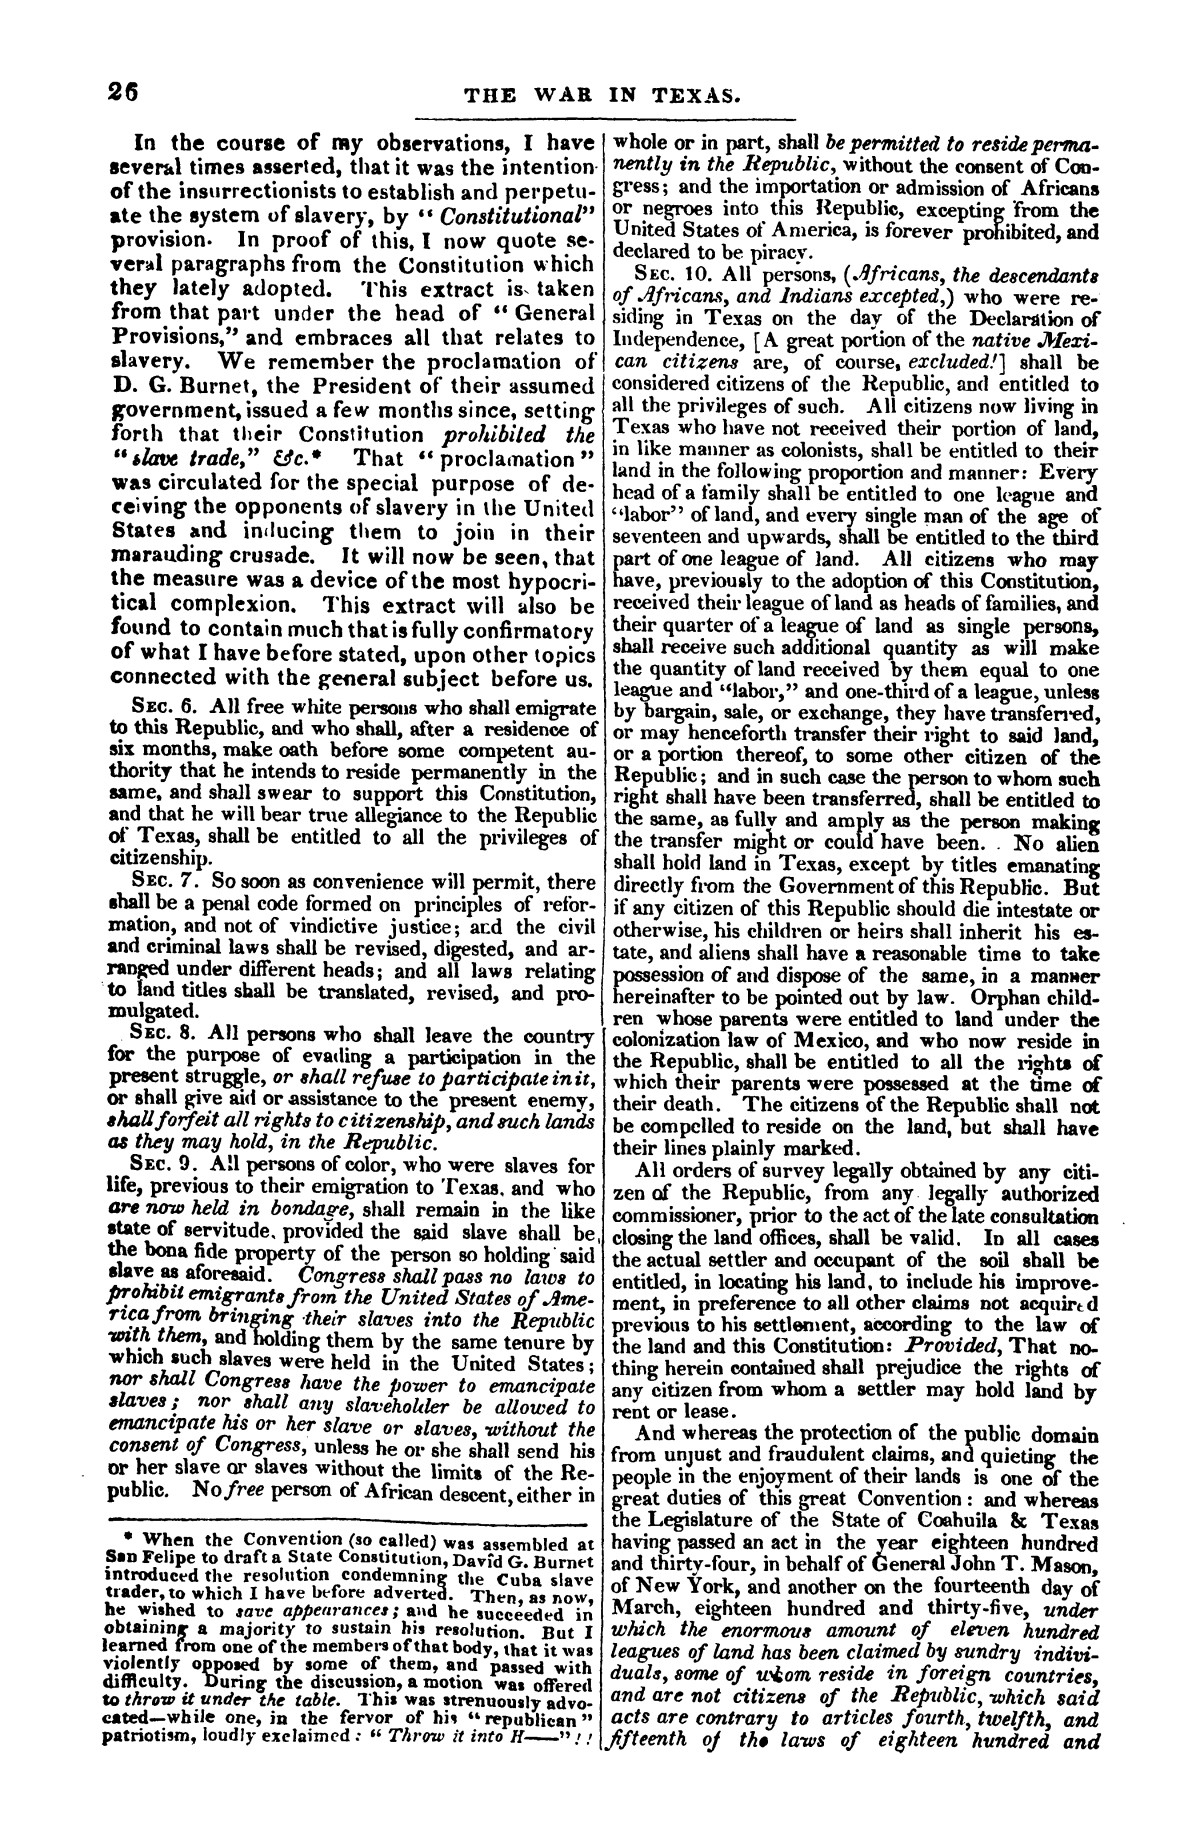 The War in Texas; A Review of Facts and Circumstances, showing that this contest is a Crusade Against Mexico, set on foot by Slaveholders, Land Speculators, &c. In Order to Re-Establish, Extend, and Perpetuate the System of Slavery and the Slave Trade.
                                                
                                                    [Sequence #]: 26 of 64
                                                